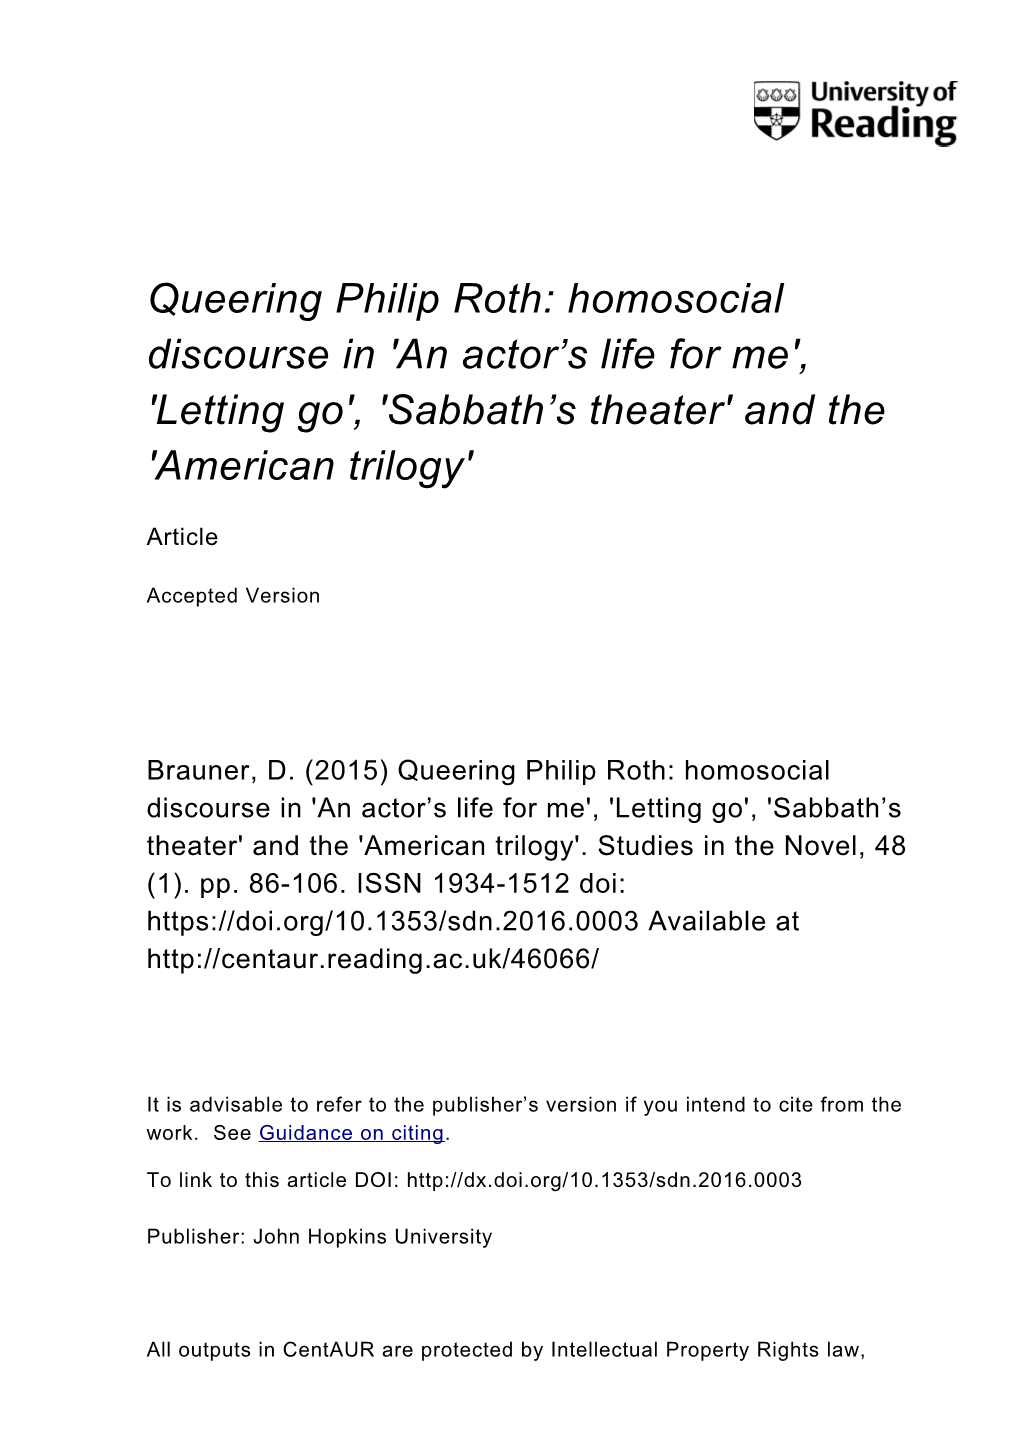 Queering Philip Roth: Homosocial Discourse in 'An Actor's